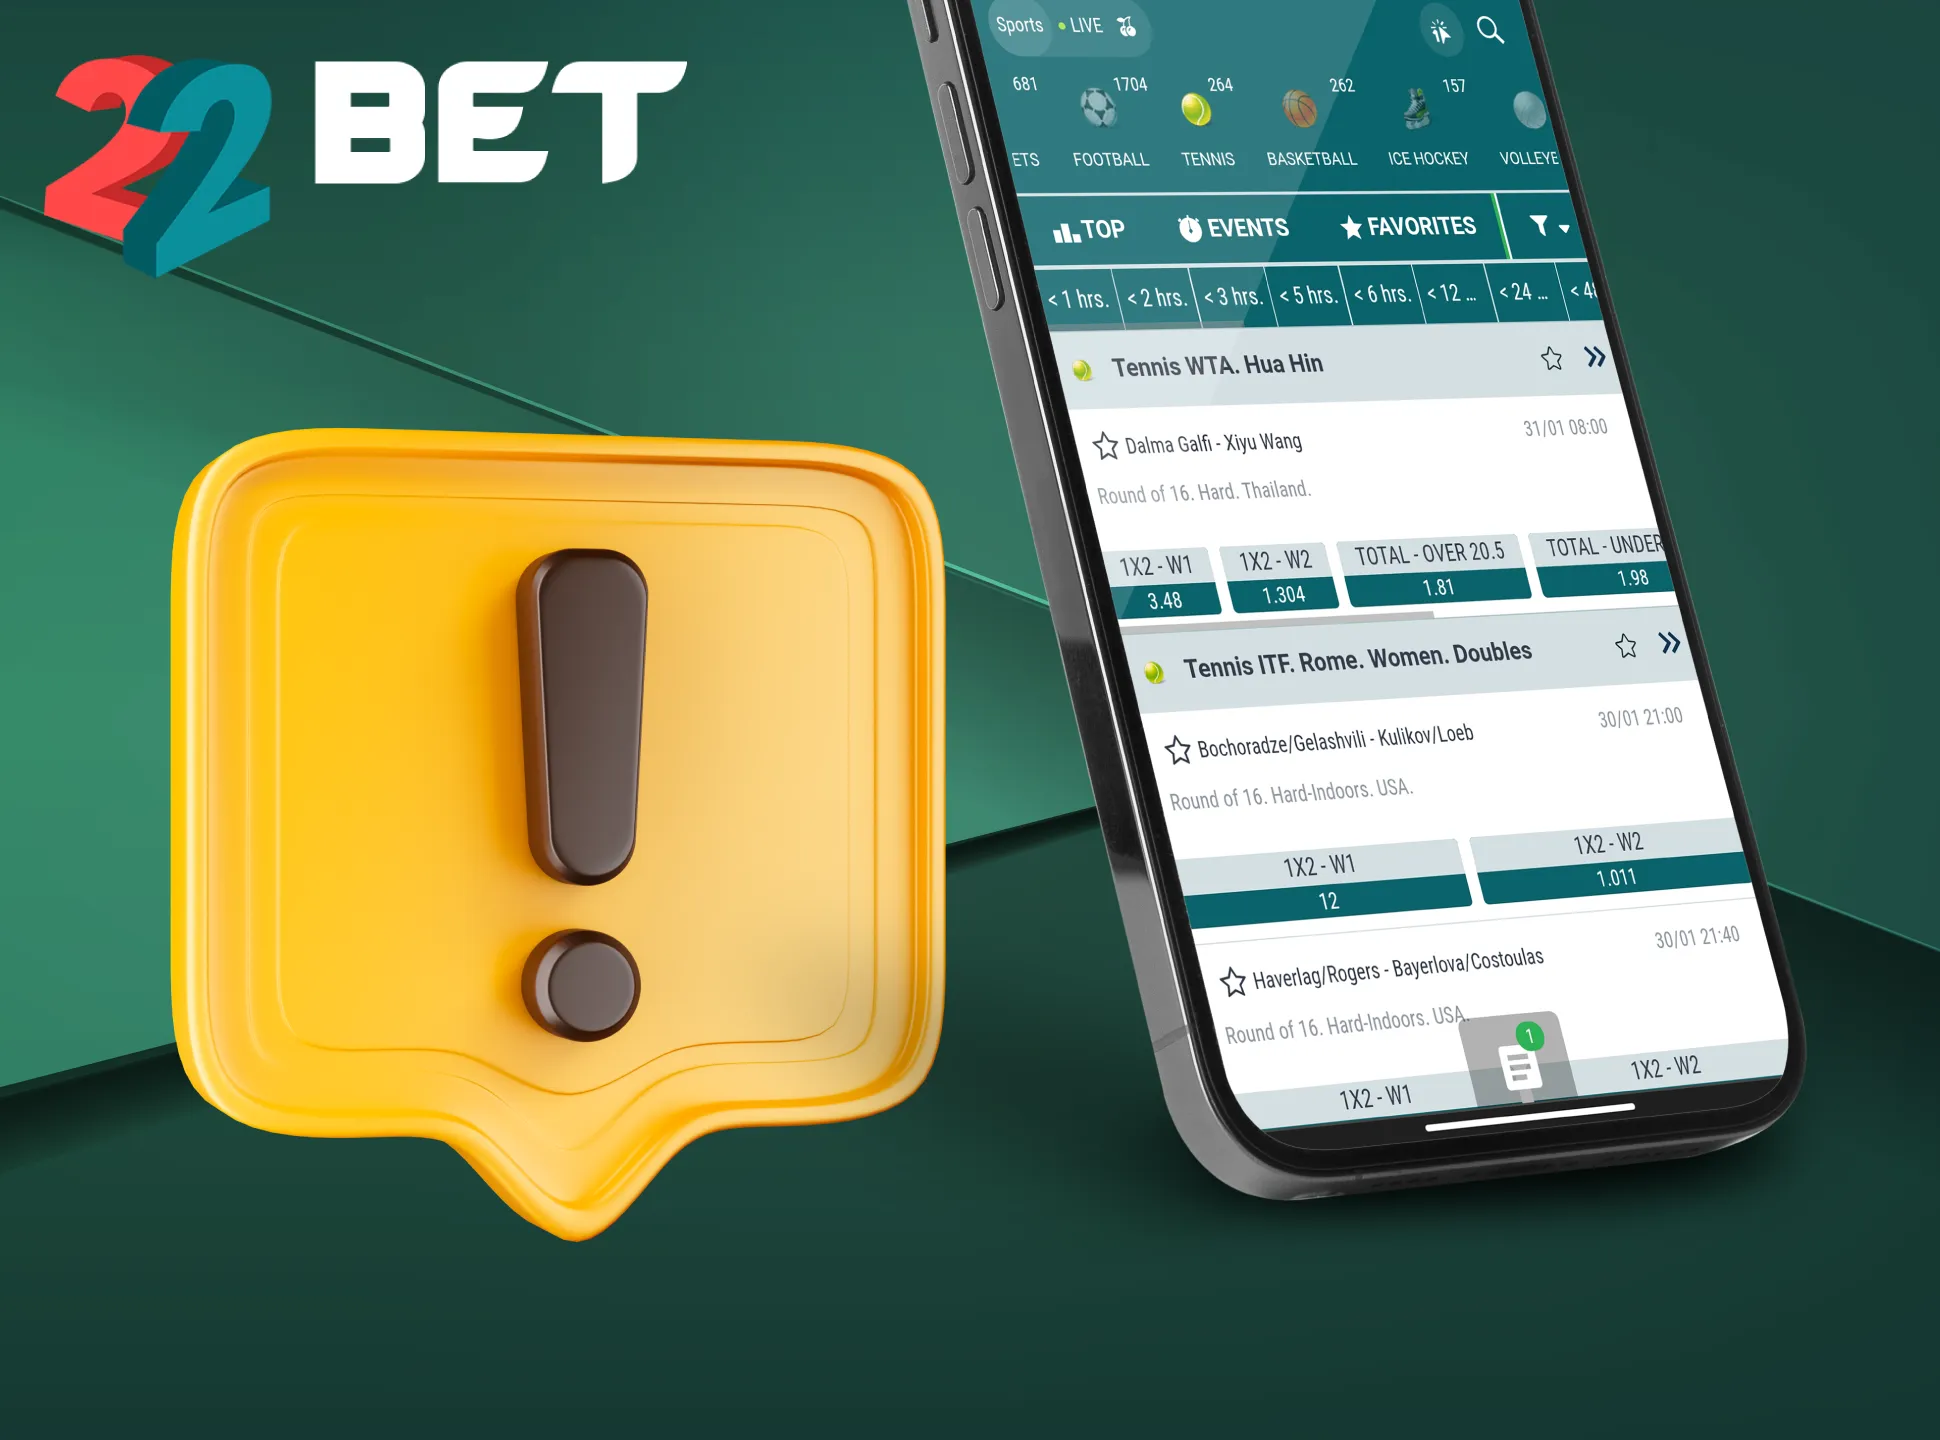 Please consider important aspects before using the 22Bet app.